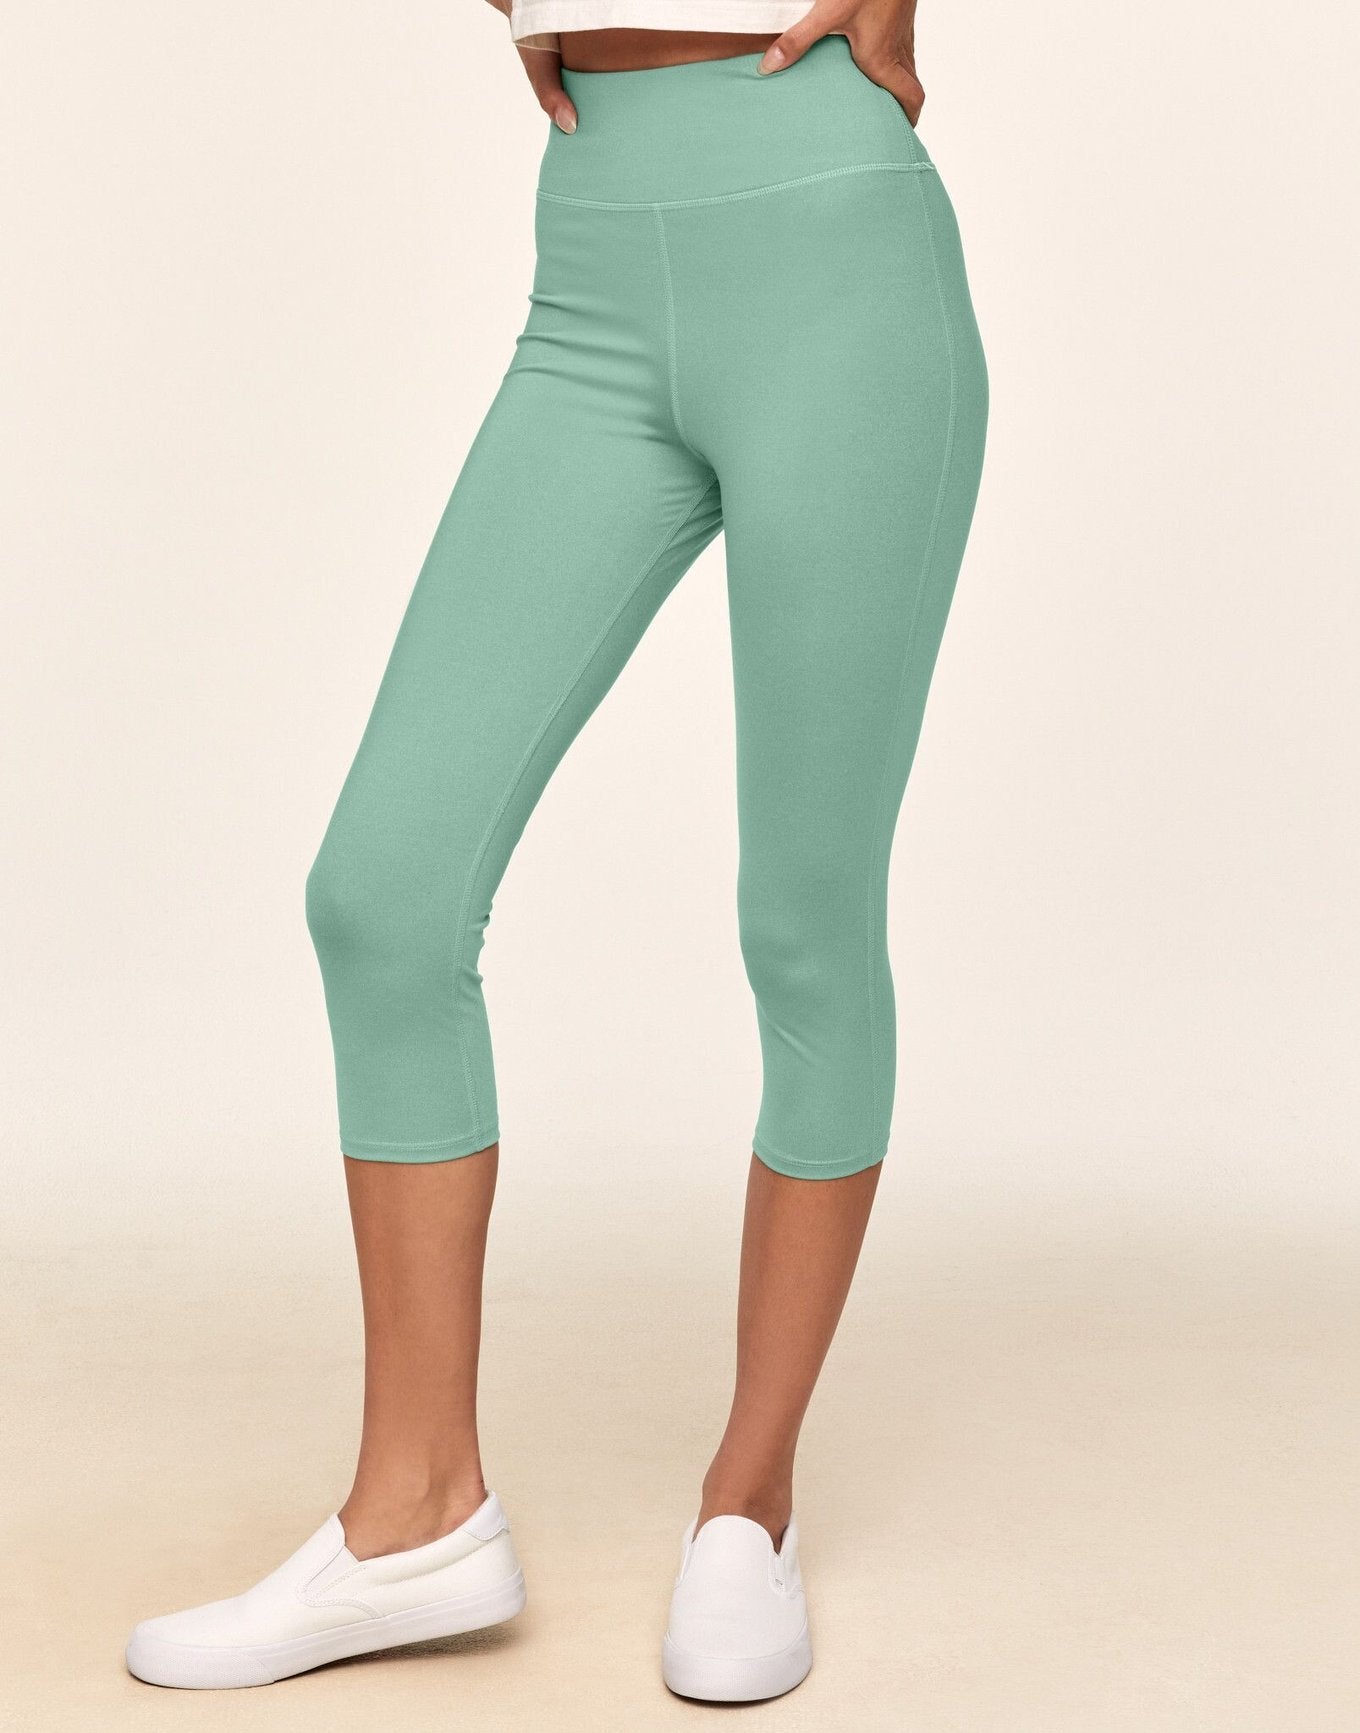 Walkpop Haley Heathered Crop Heather Compression Activewear Crop Legging in color Green Come True Heather and shape legging